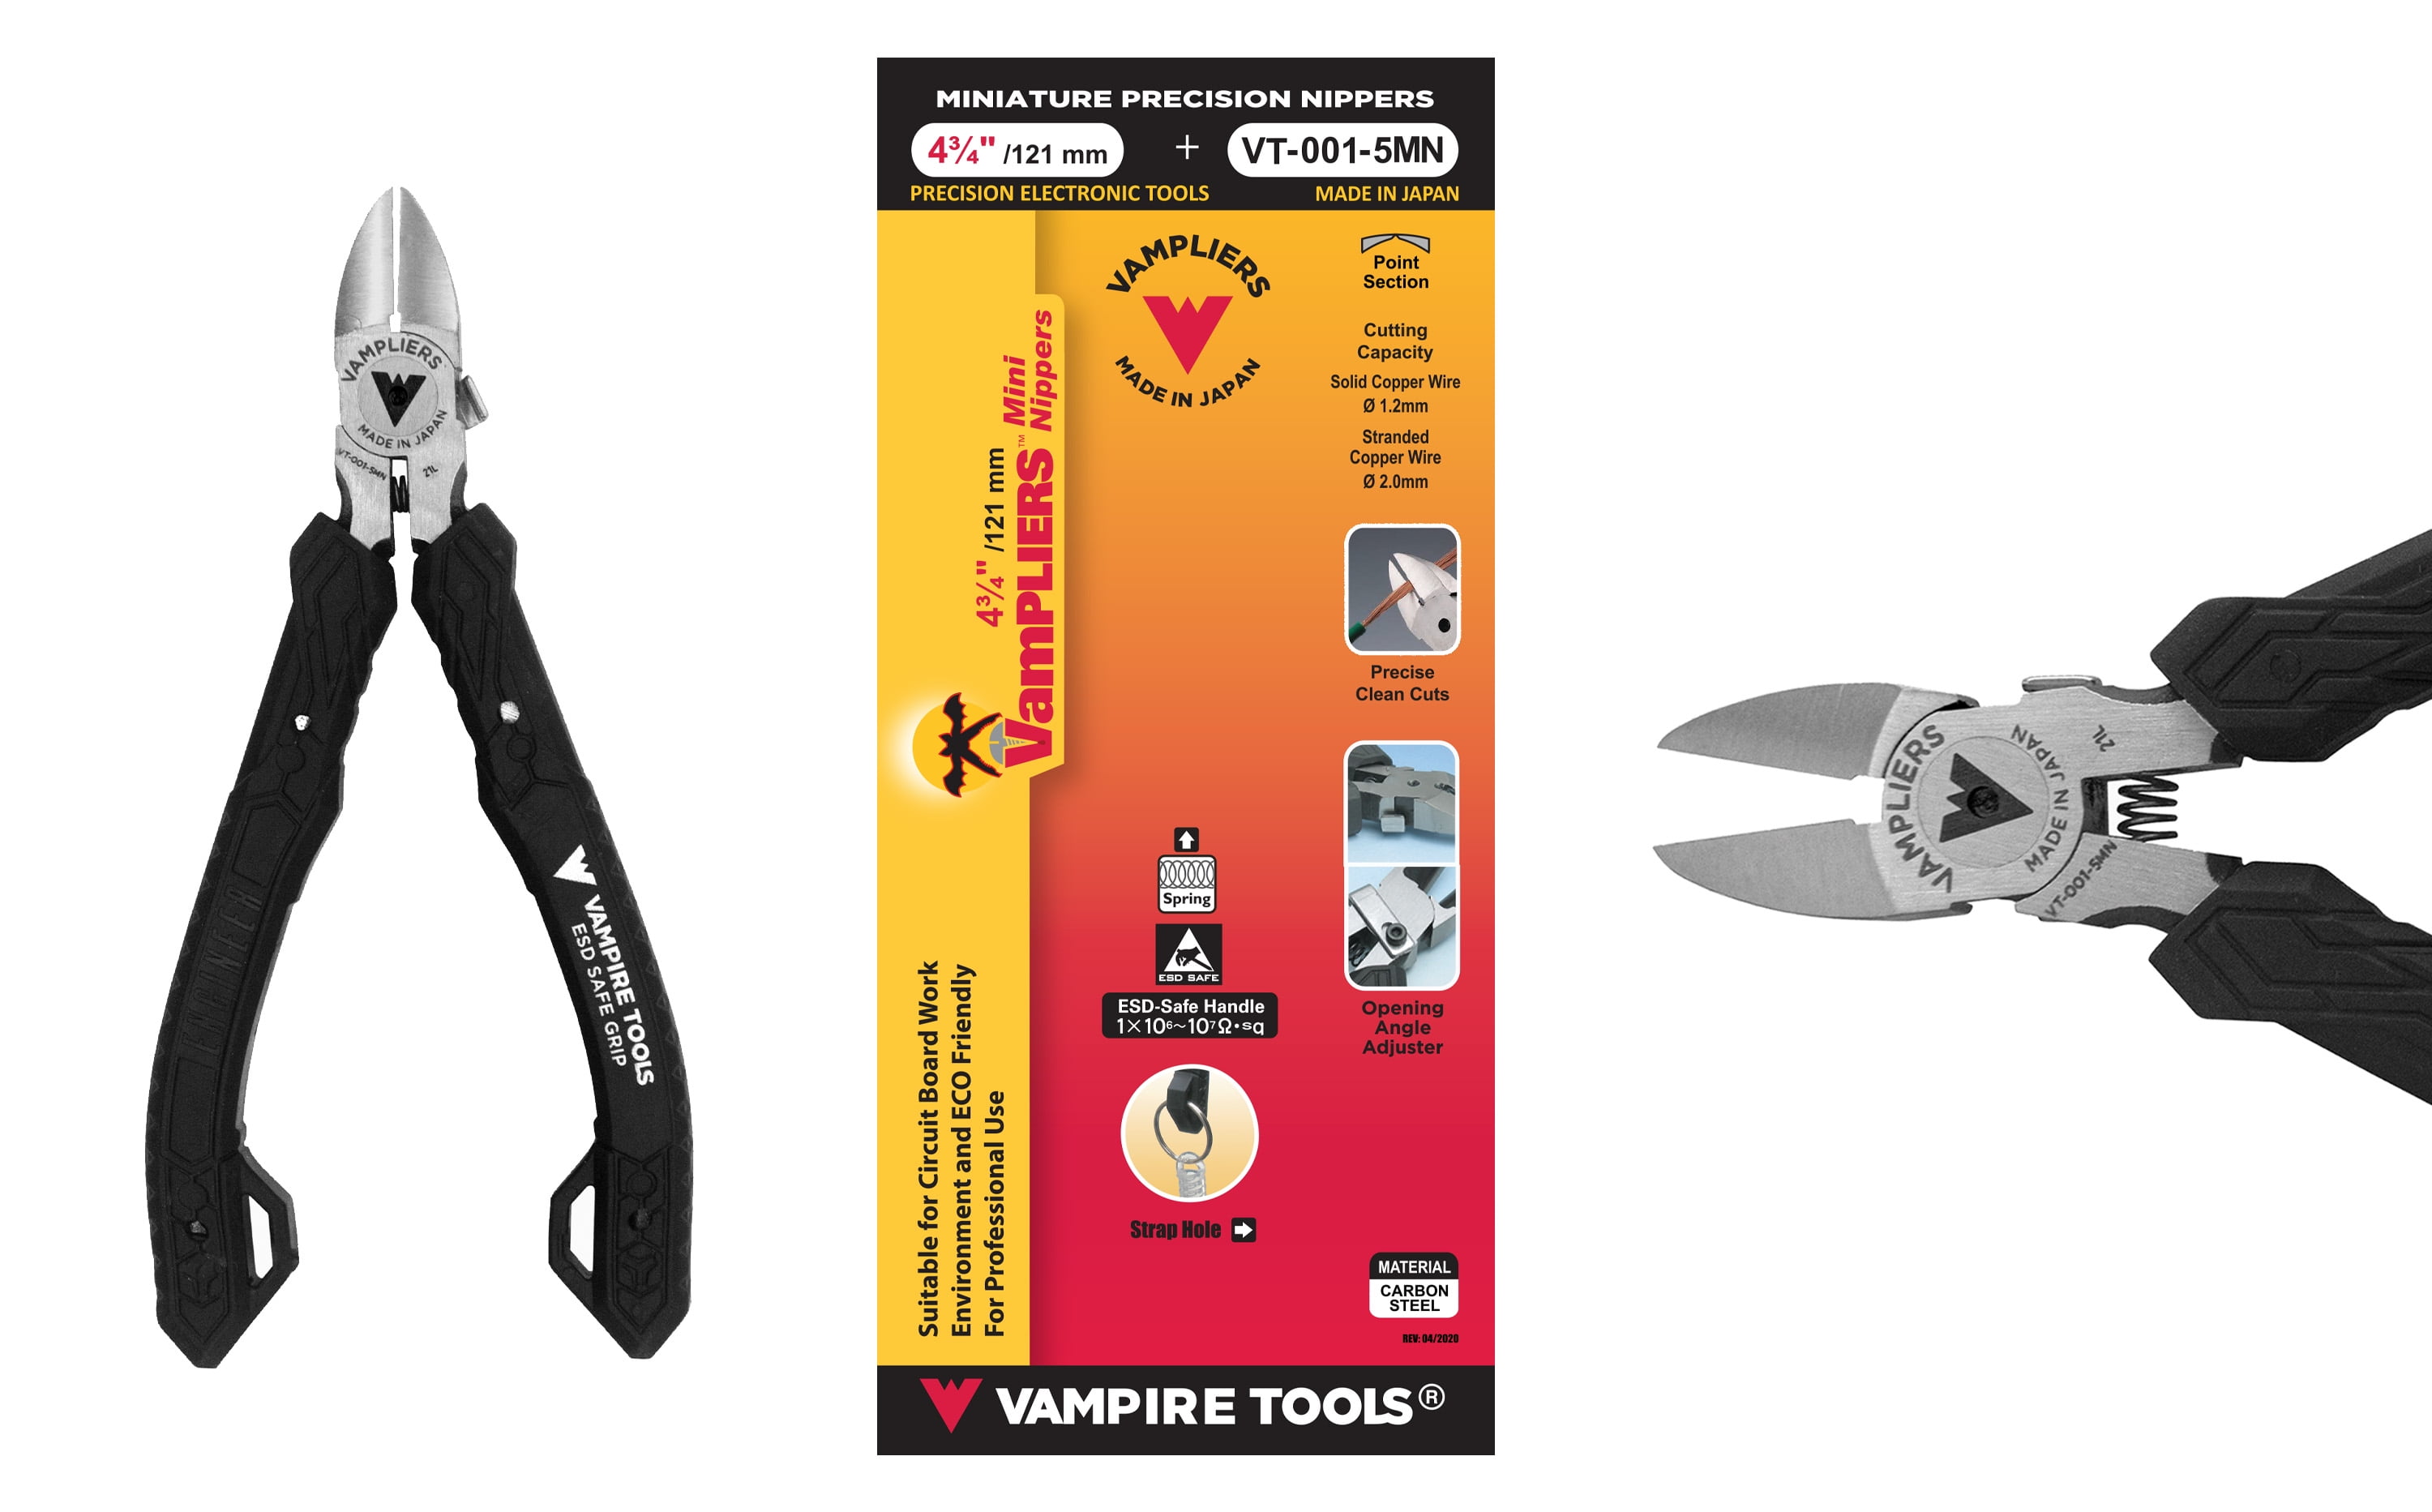 VAMPLIERS VT-001-5MN by Vampire Tools, 4.75″ Mini Precision Nippers, Electronic Wire Cutter, Made in Japan